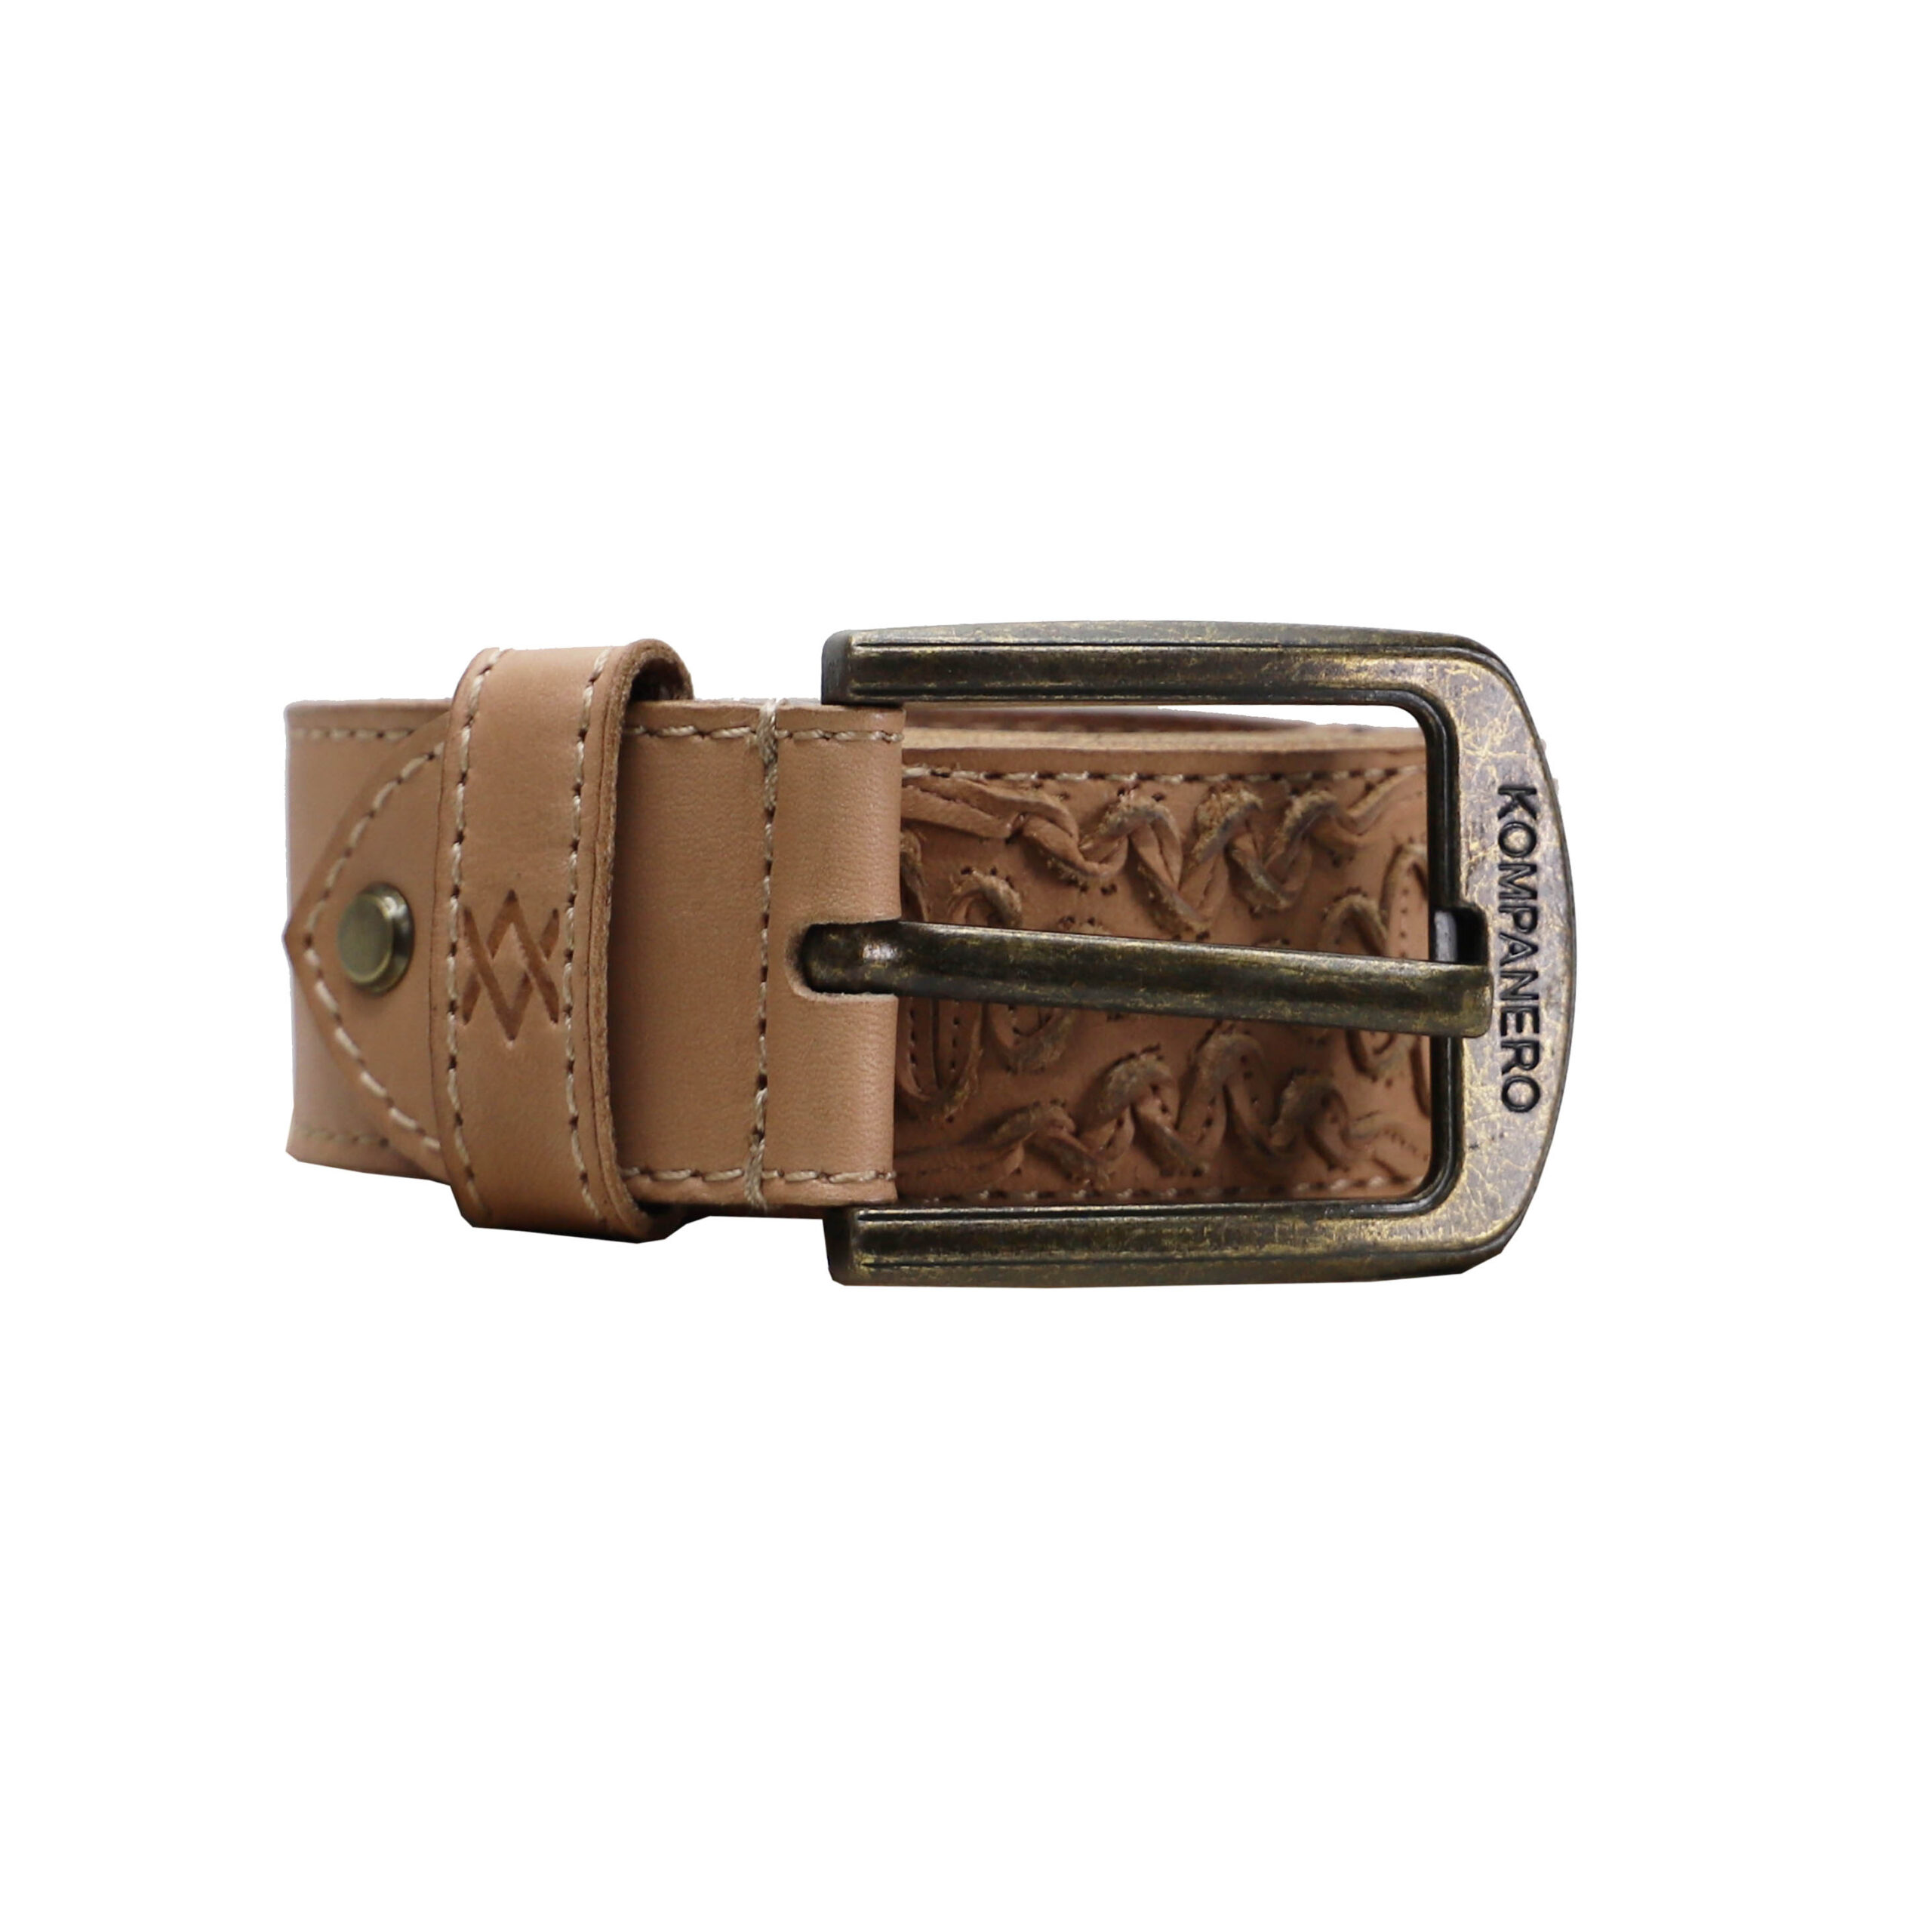 Madrid Leather Belt by Kompanero Available in Taupe